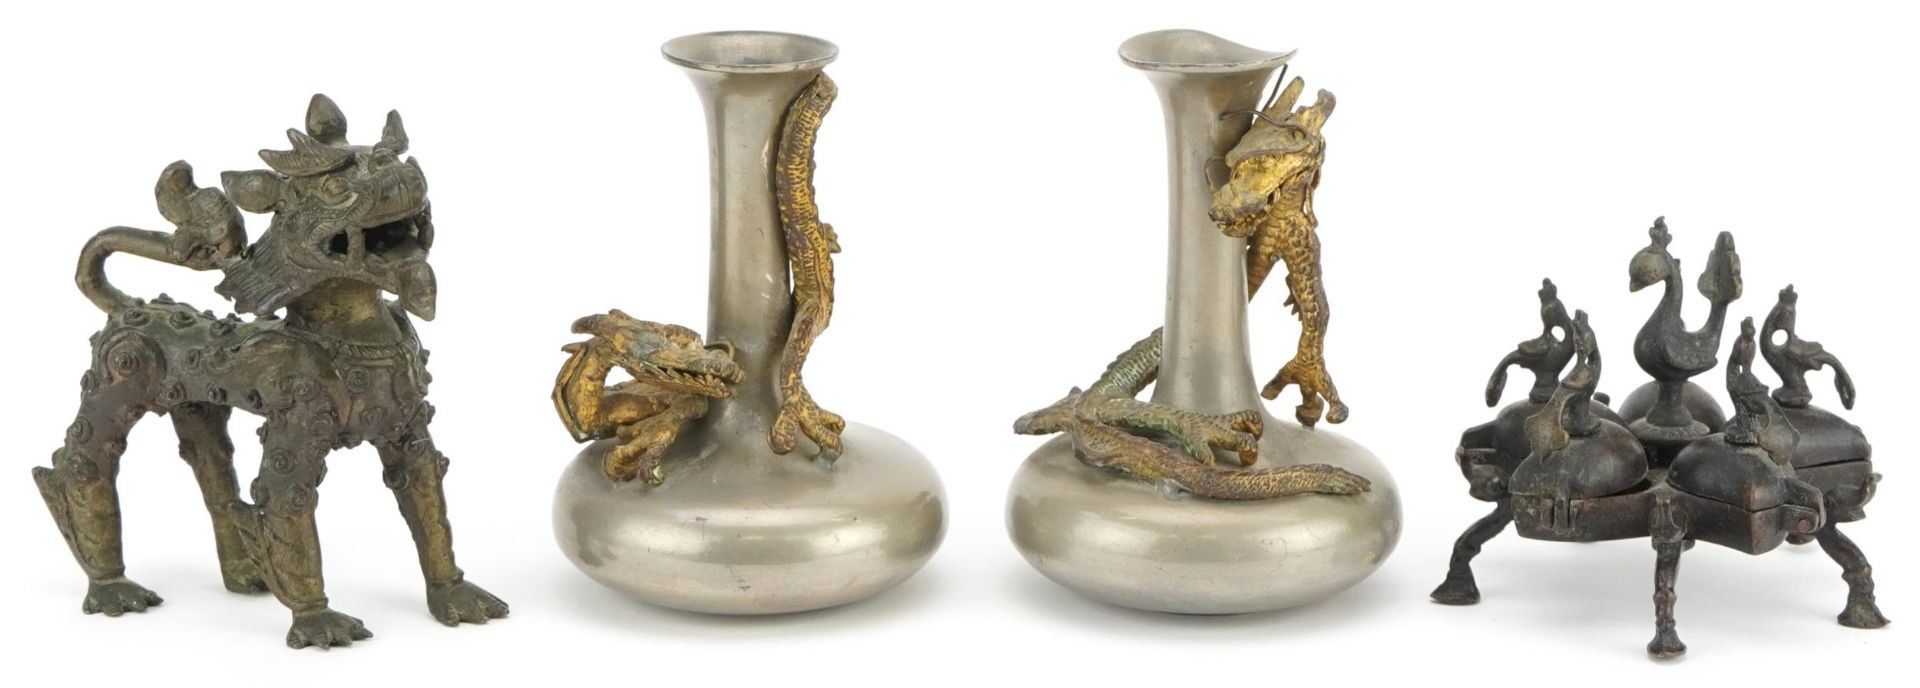 Indian and Asian metalware including a pair of pewter vases surmounted with dragons, the largest